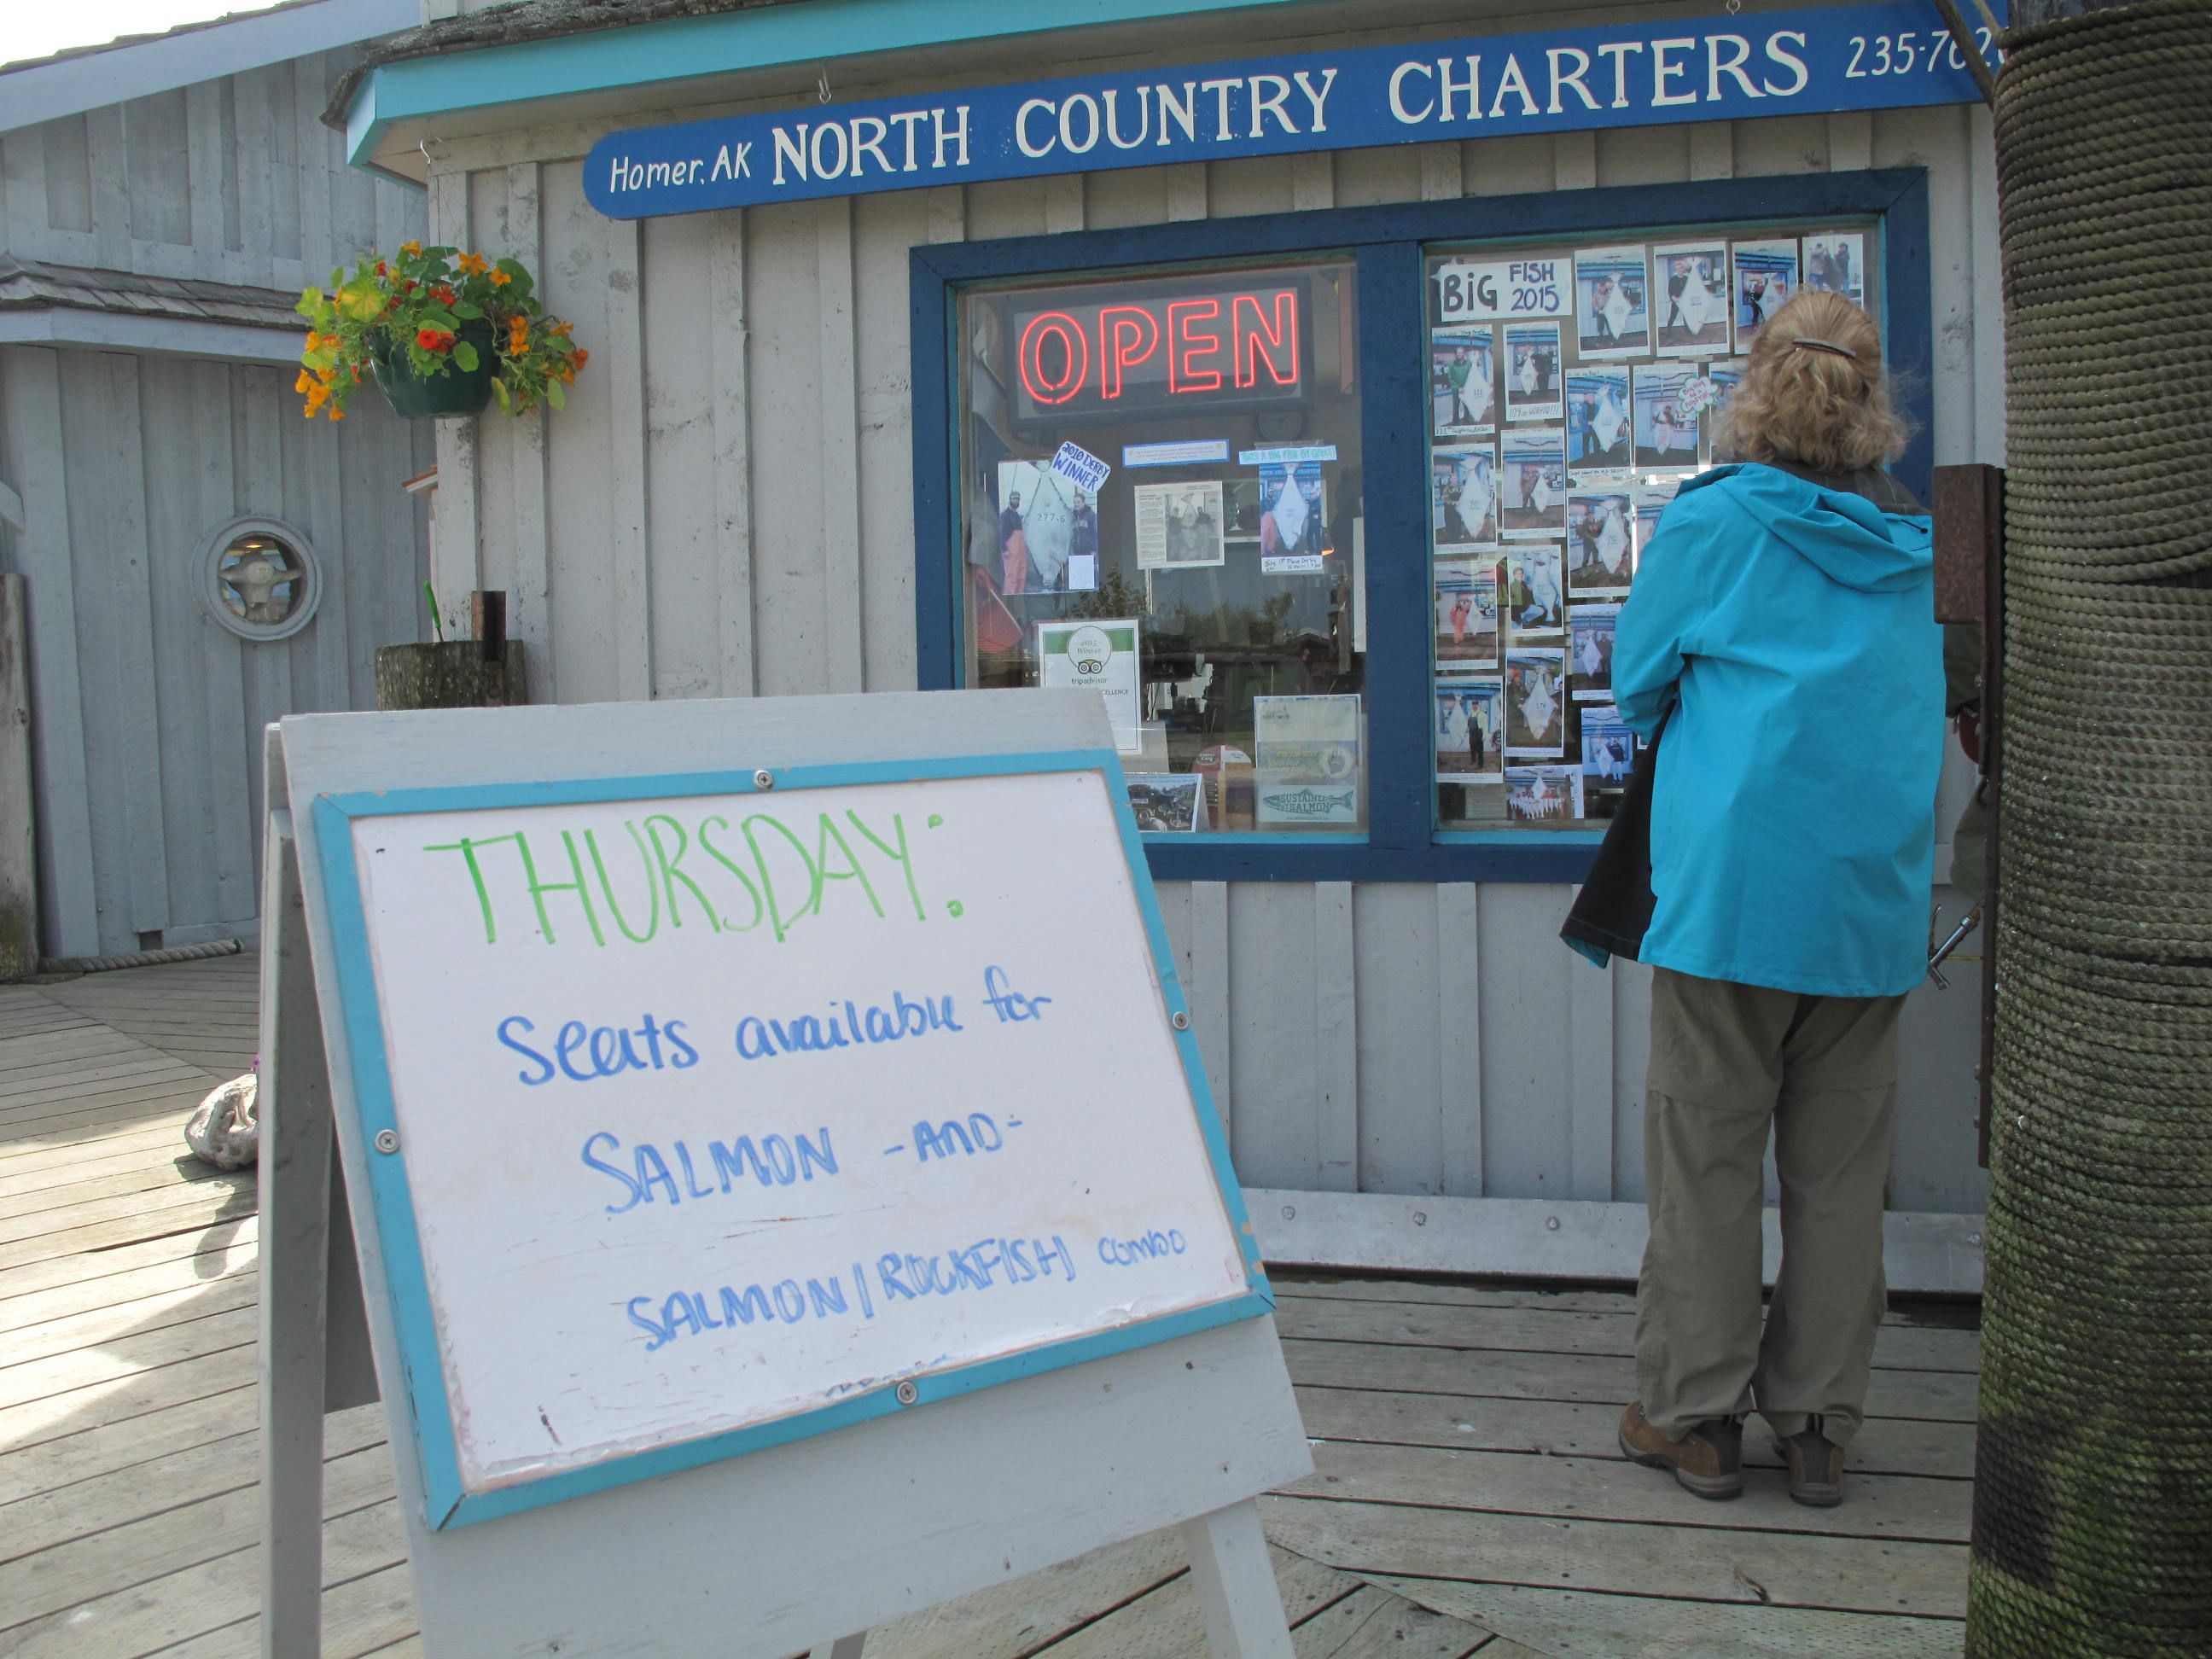 With a prohibition on charter fishing for halibut on Thursdays, Spit businesses have changed their offerings.